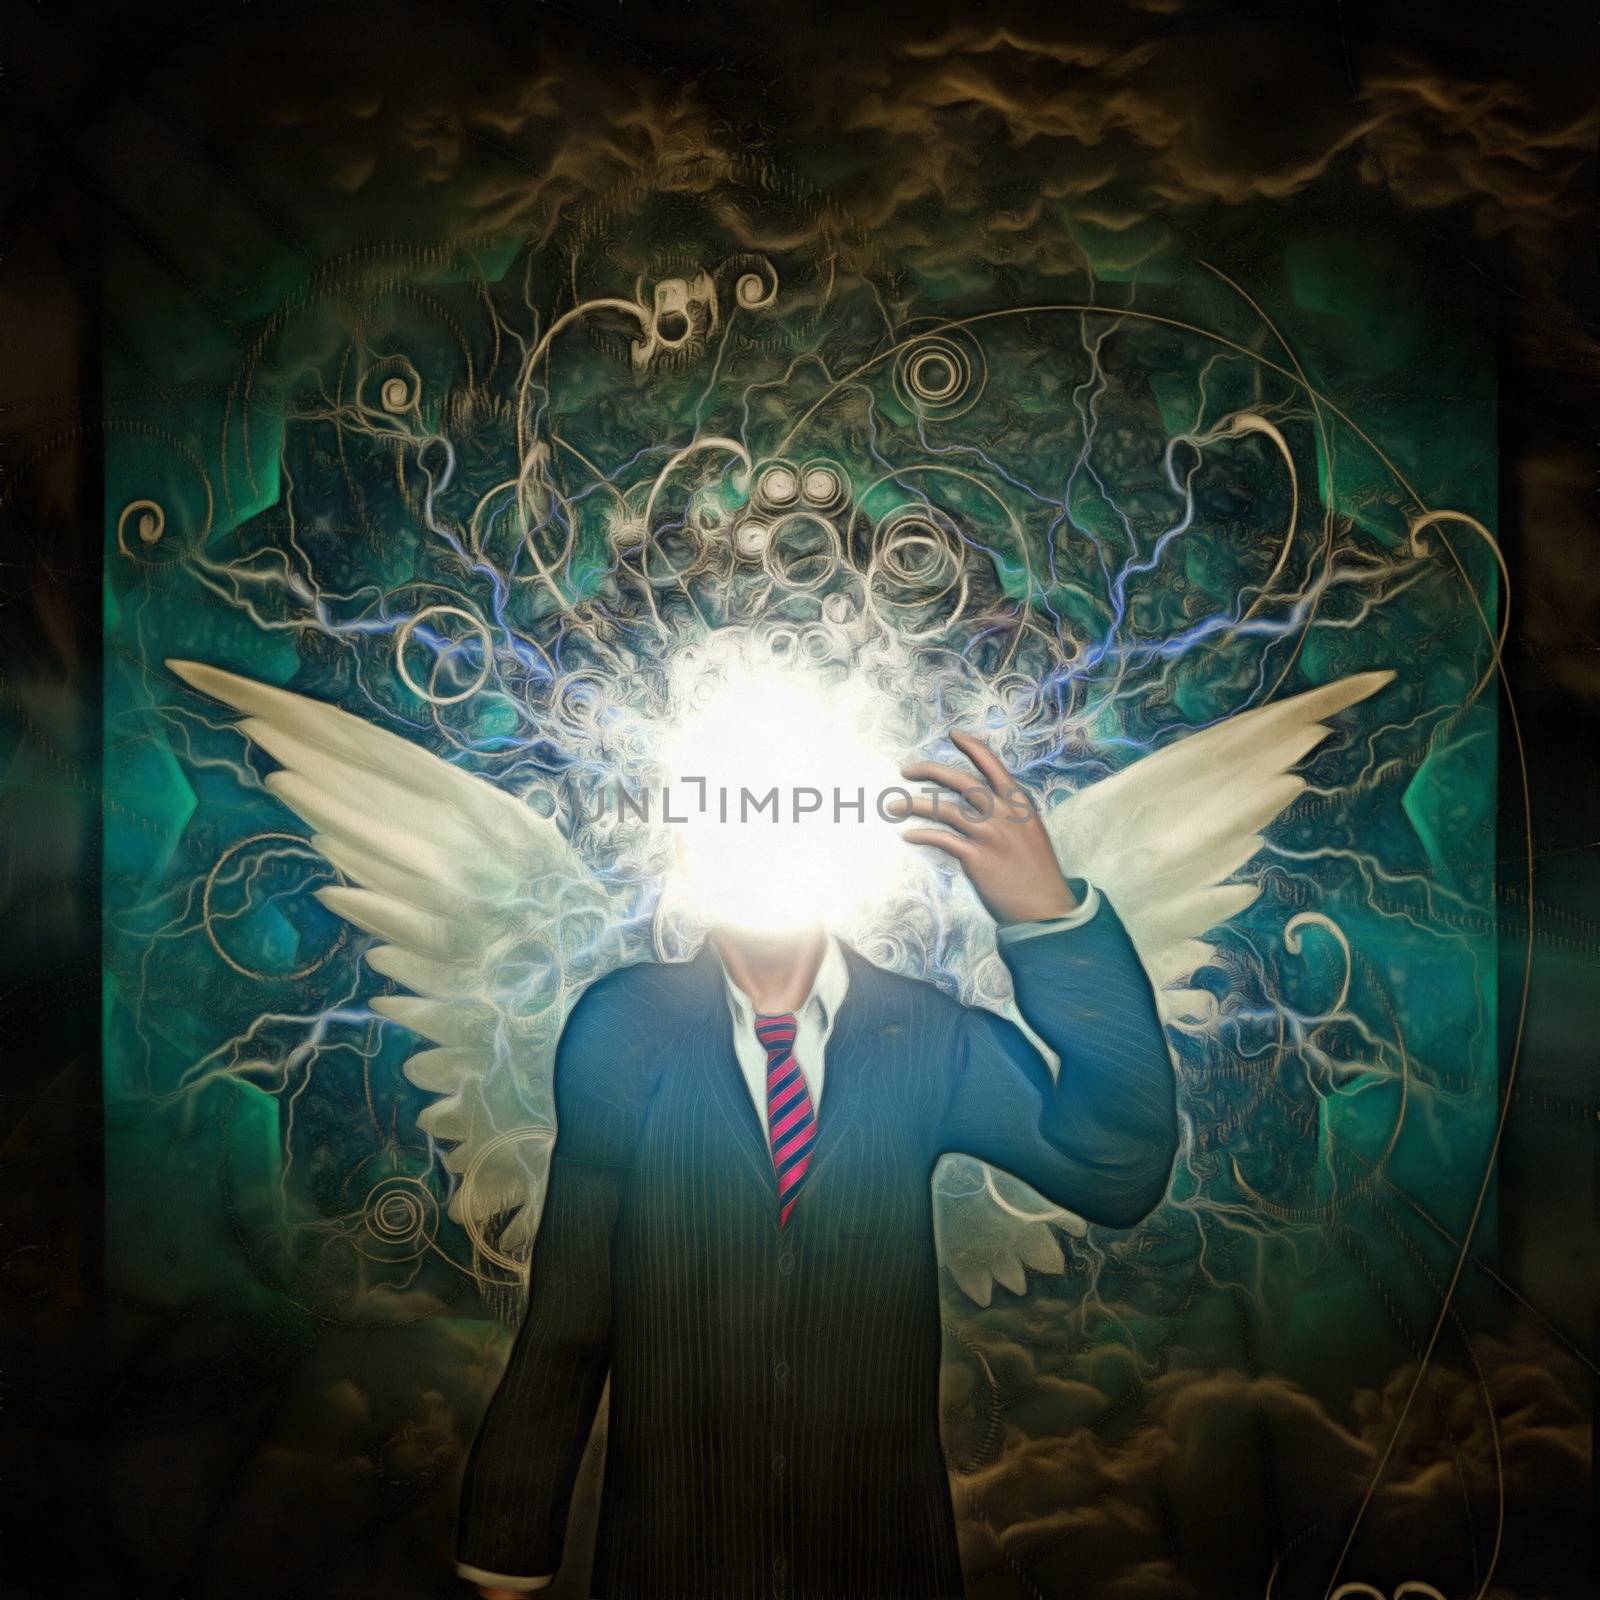 Surreal painting. Faceless man in suit with white wings. Clouds on a background.